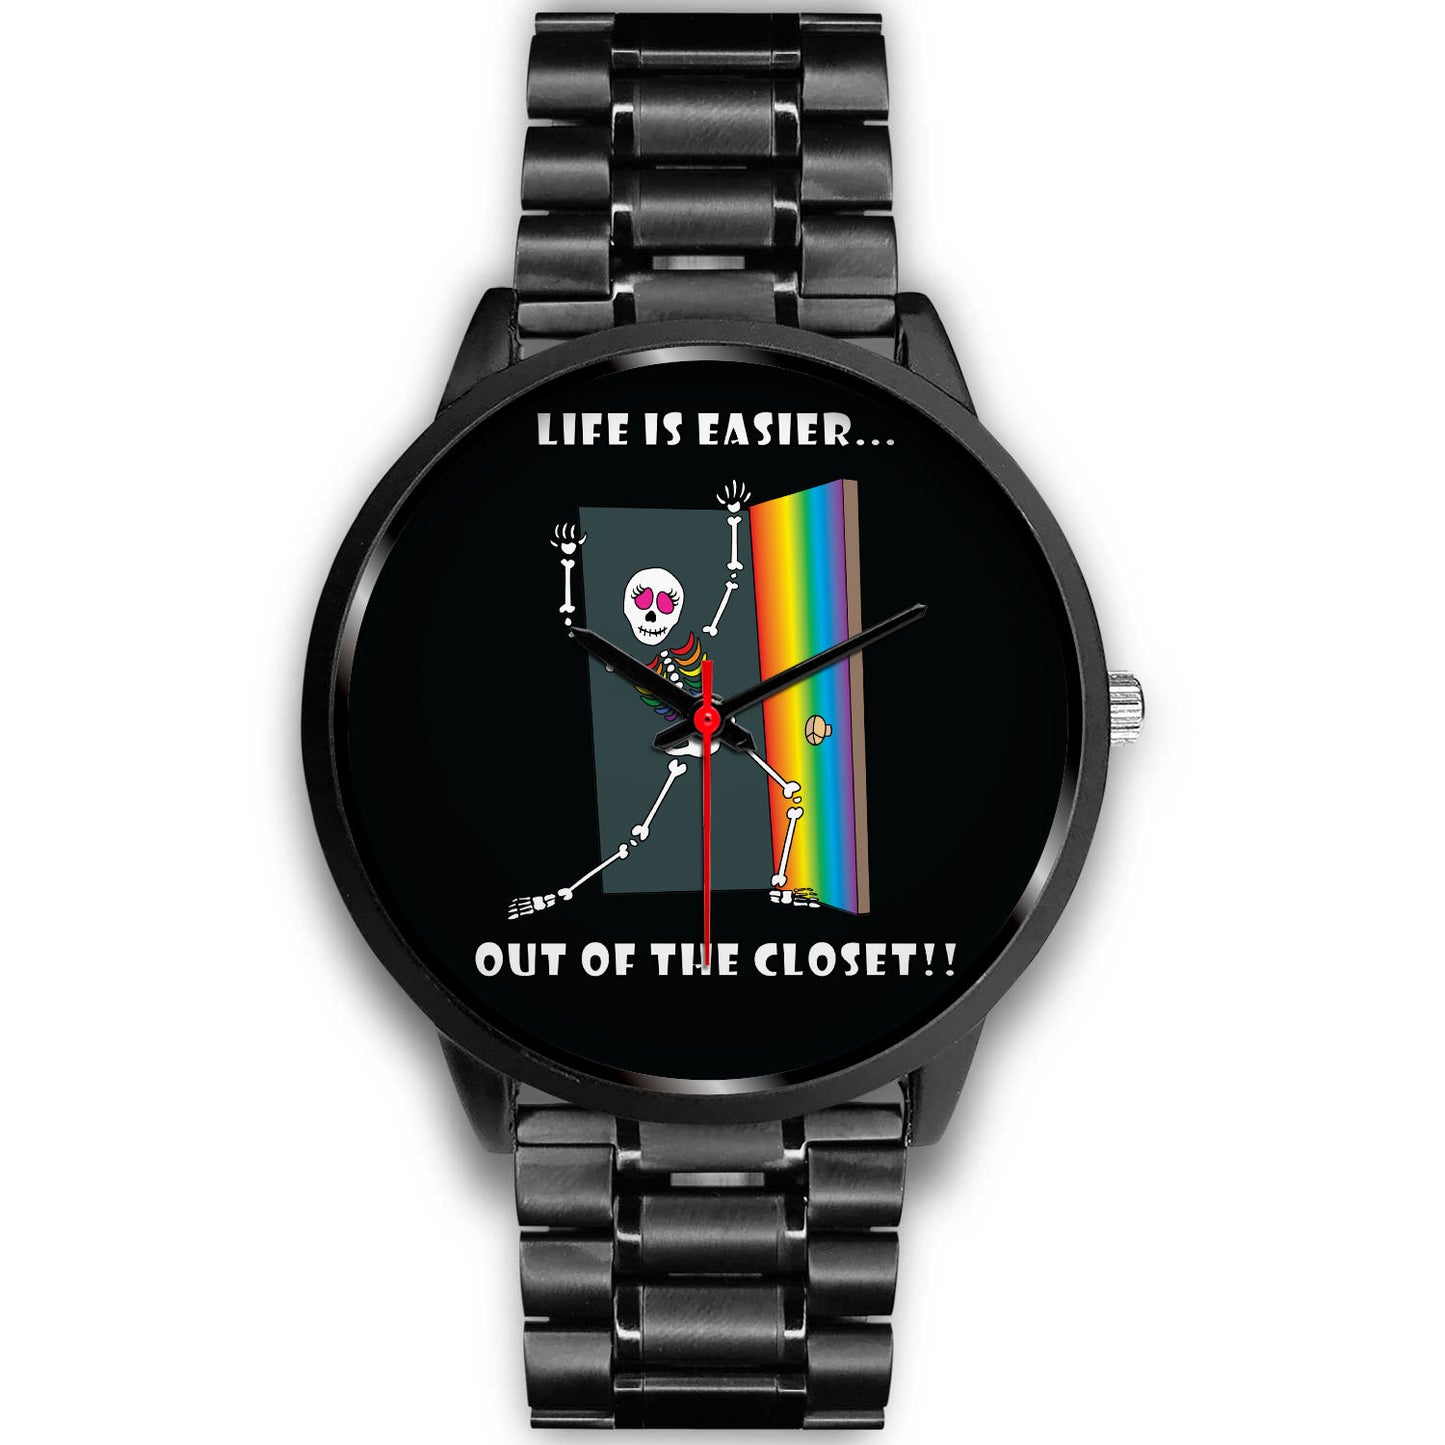 Life Is Easier Out Of The Closet/Heck Yeah!! Female Gender LGBT Custom Design Watch